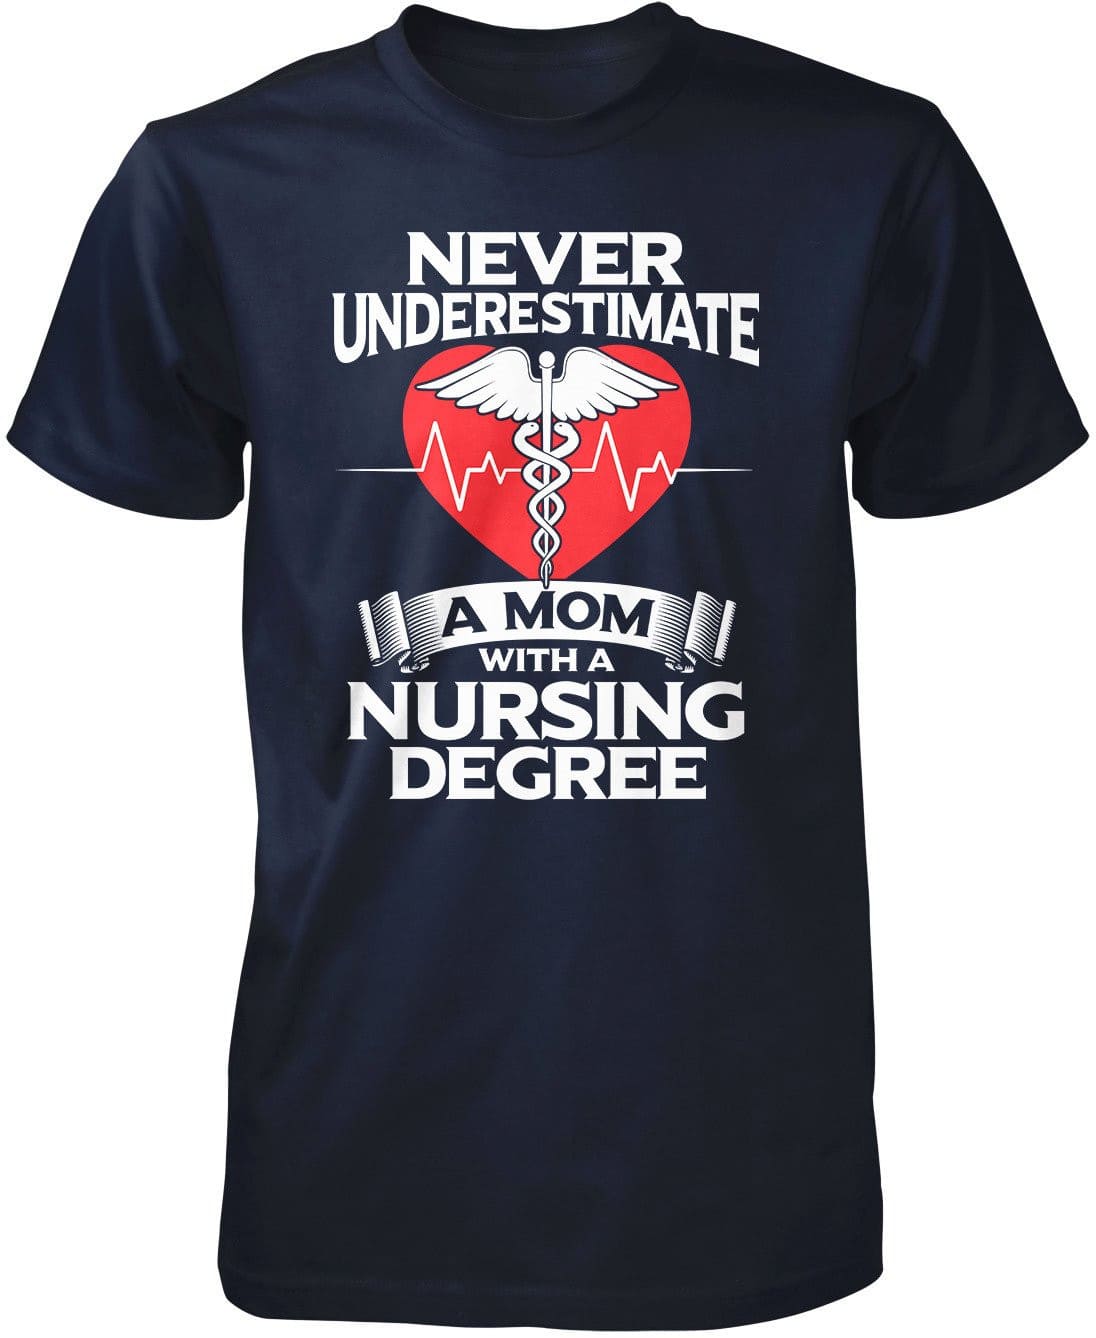 Never Underestimate a Mom with a Nursing Degree T-Shirt